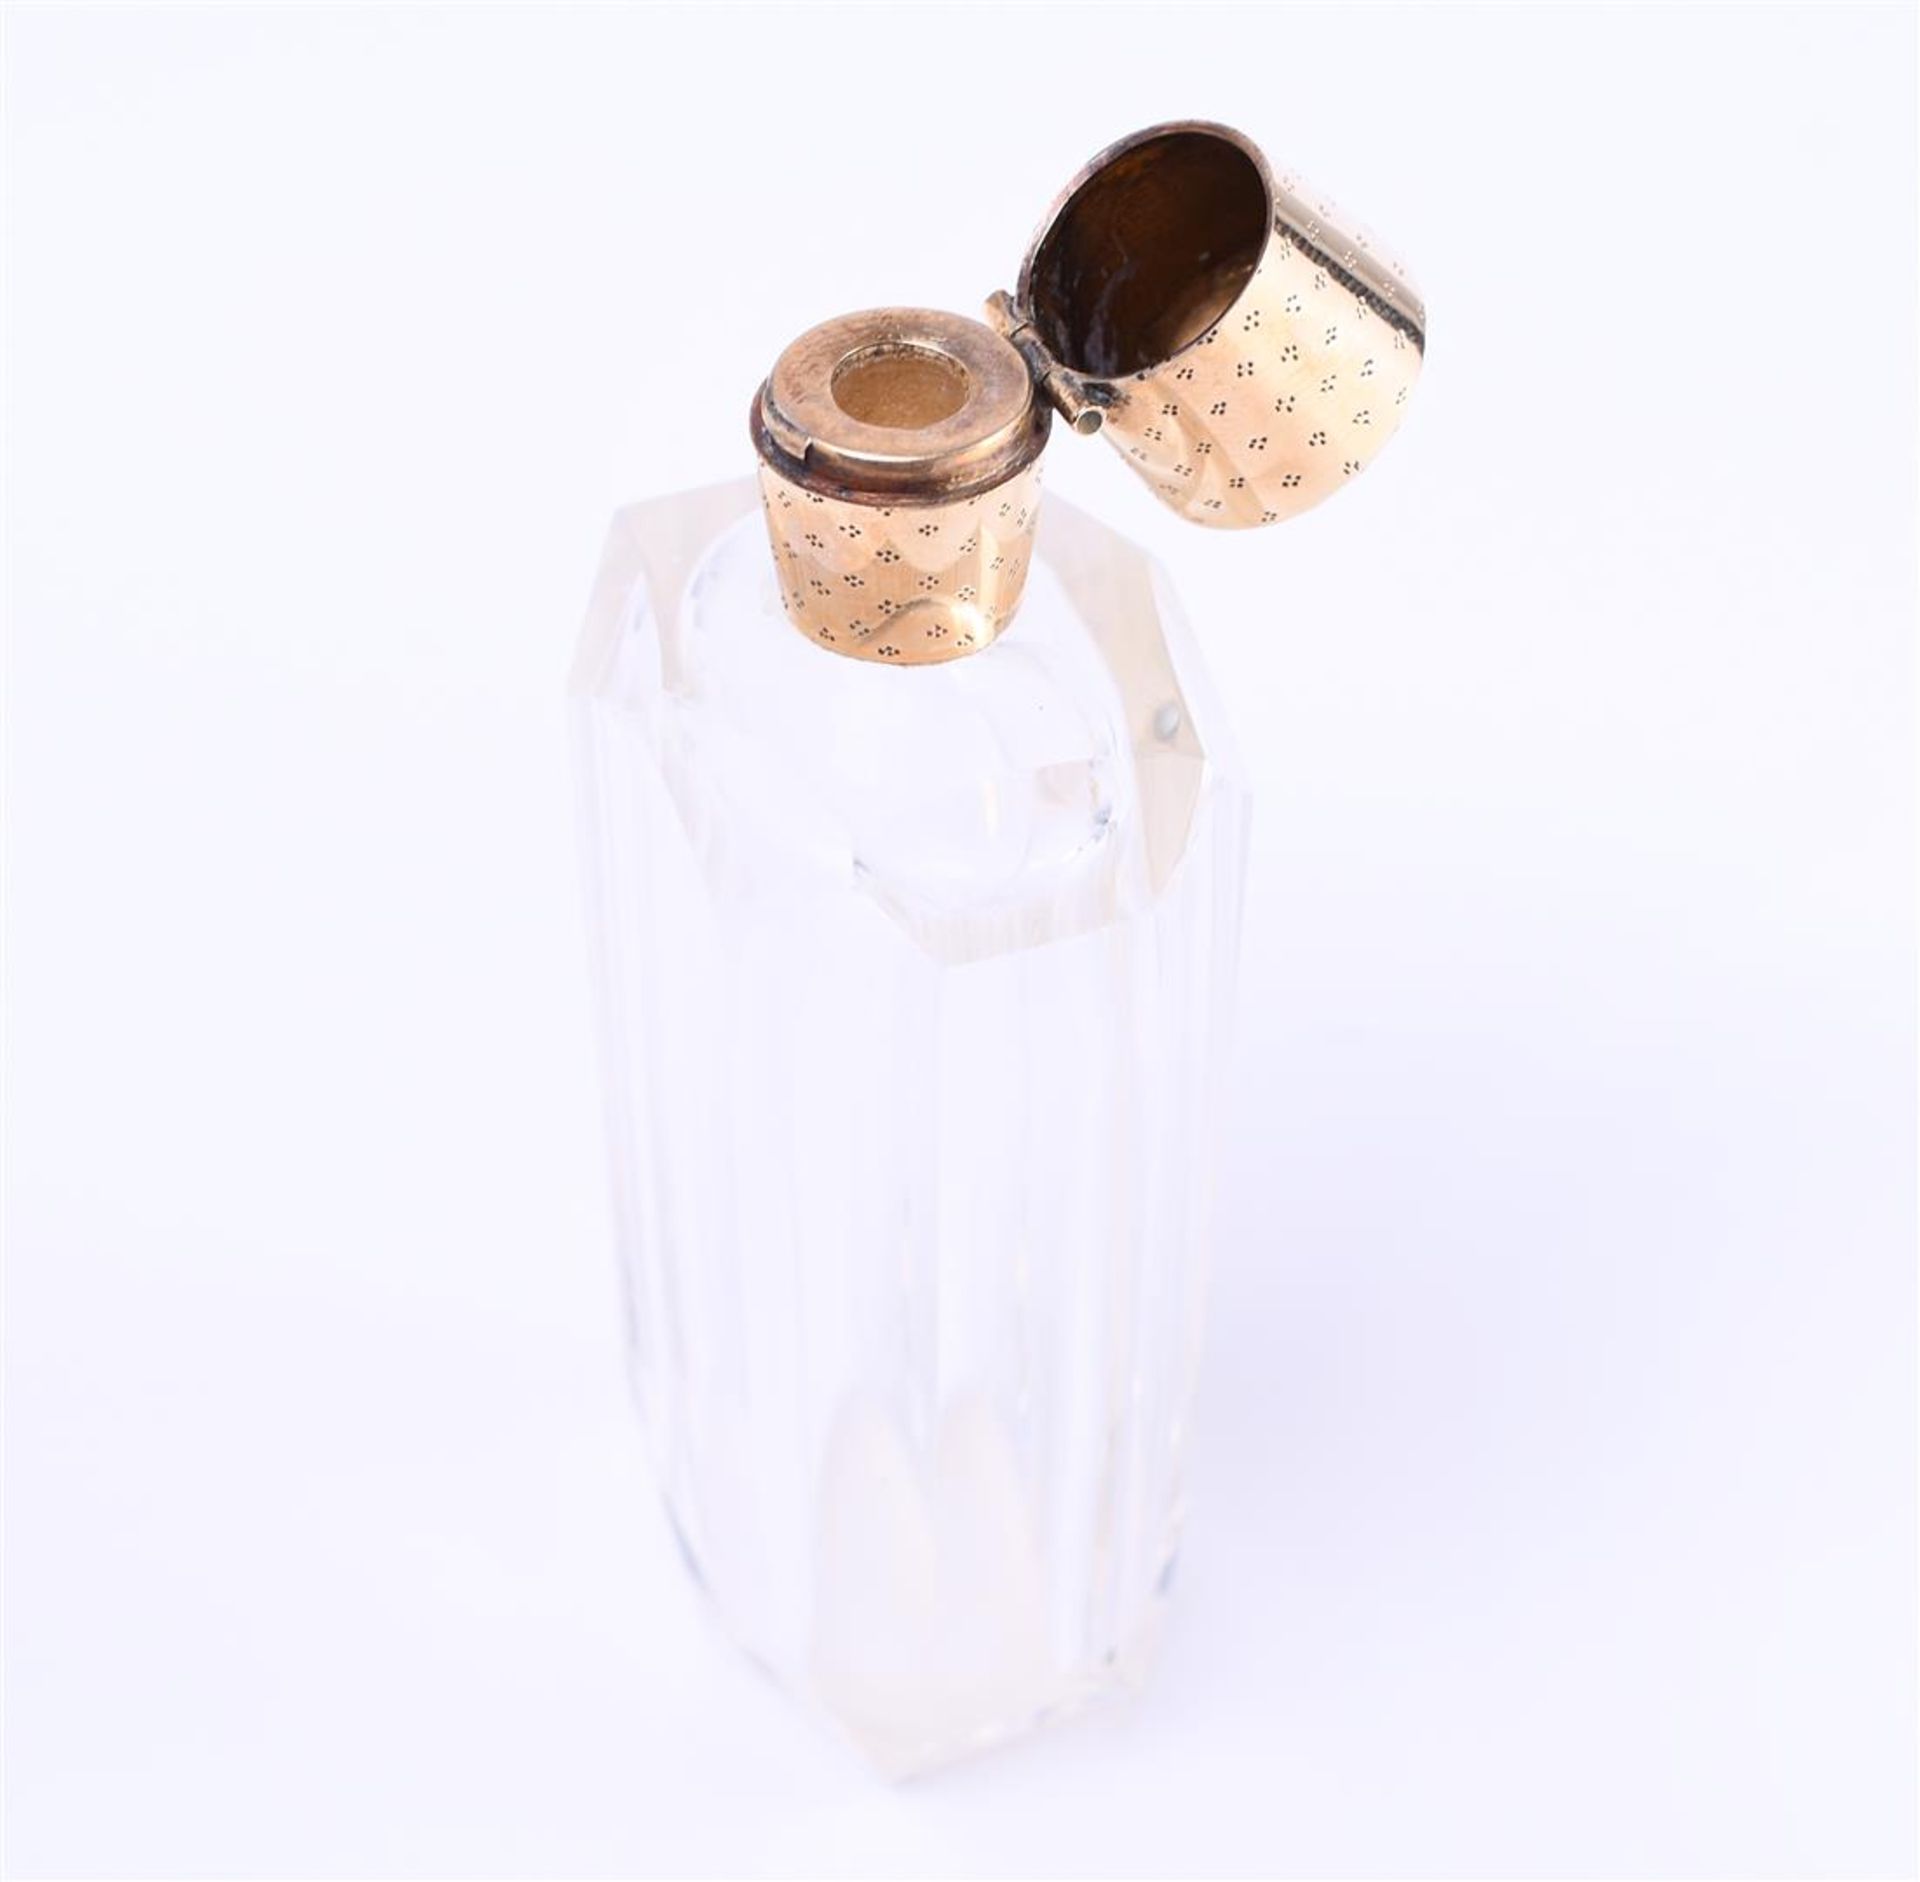 14 kt. Perfume bottle with travel case. Perfume bottle is made of glass and 14kt gold cap. Travel ca - Image 3 of 5